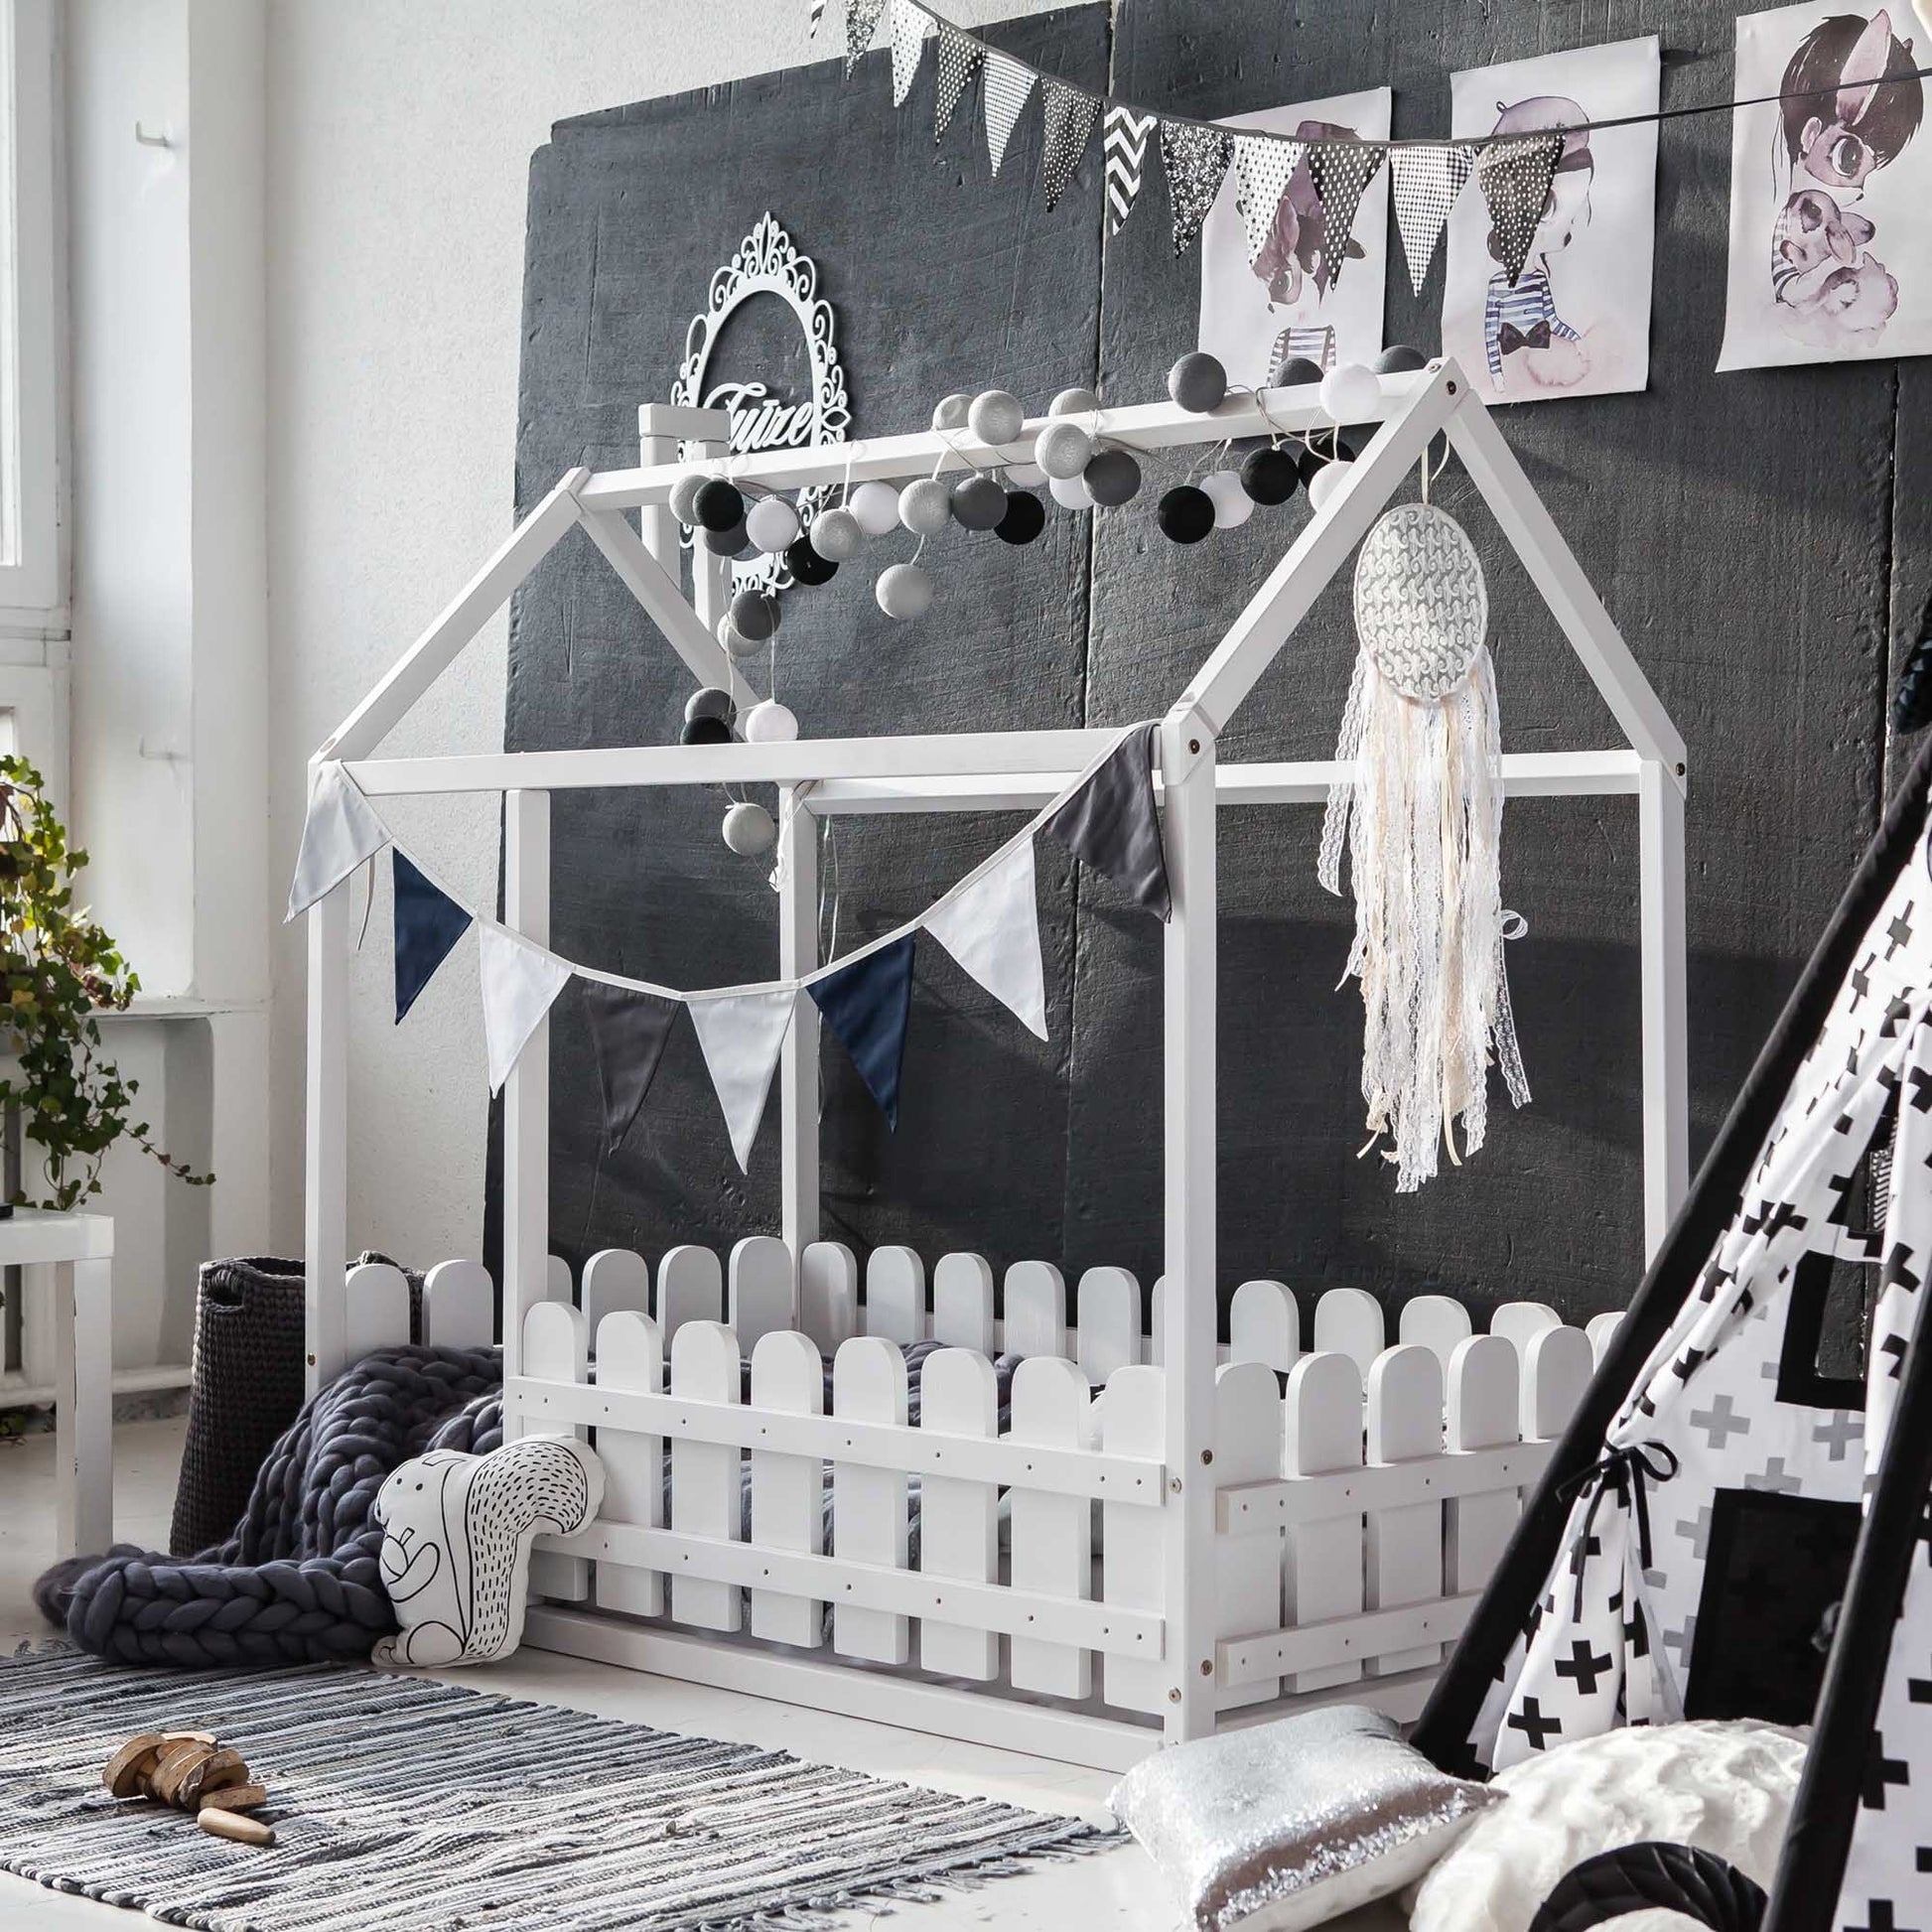 A child's room with a teepee bed and a platform house bed with a picket fence.